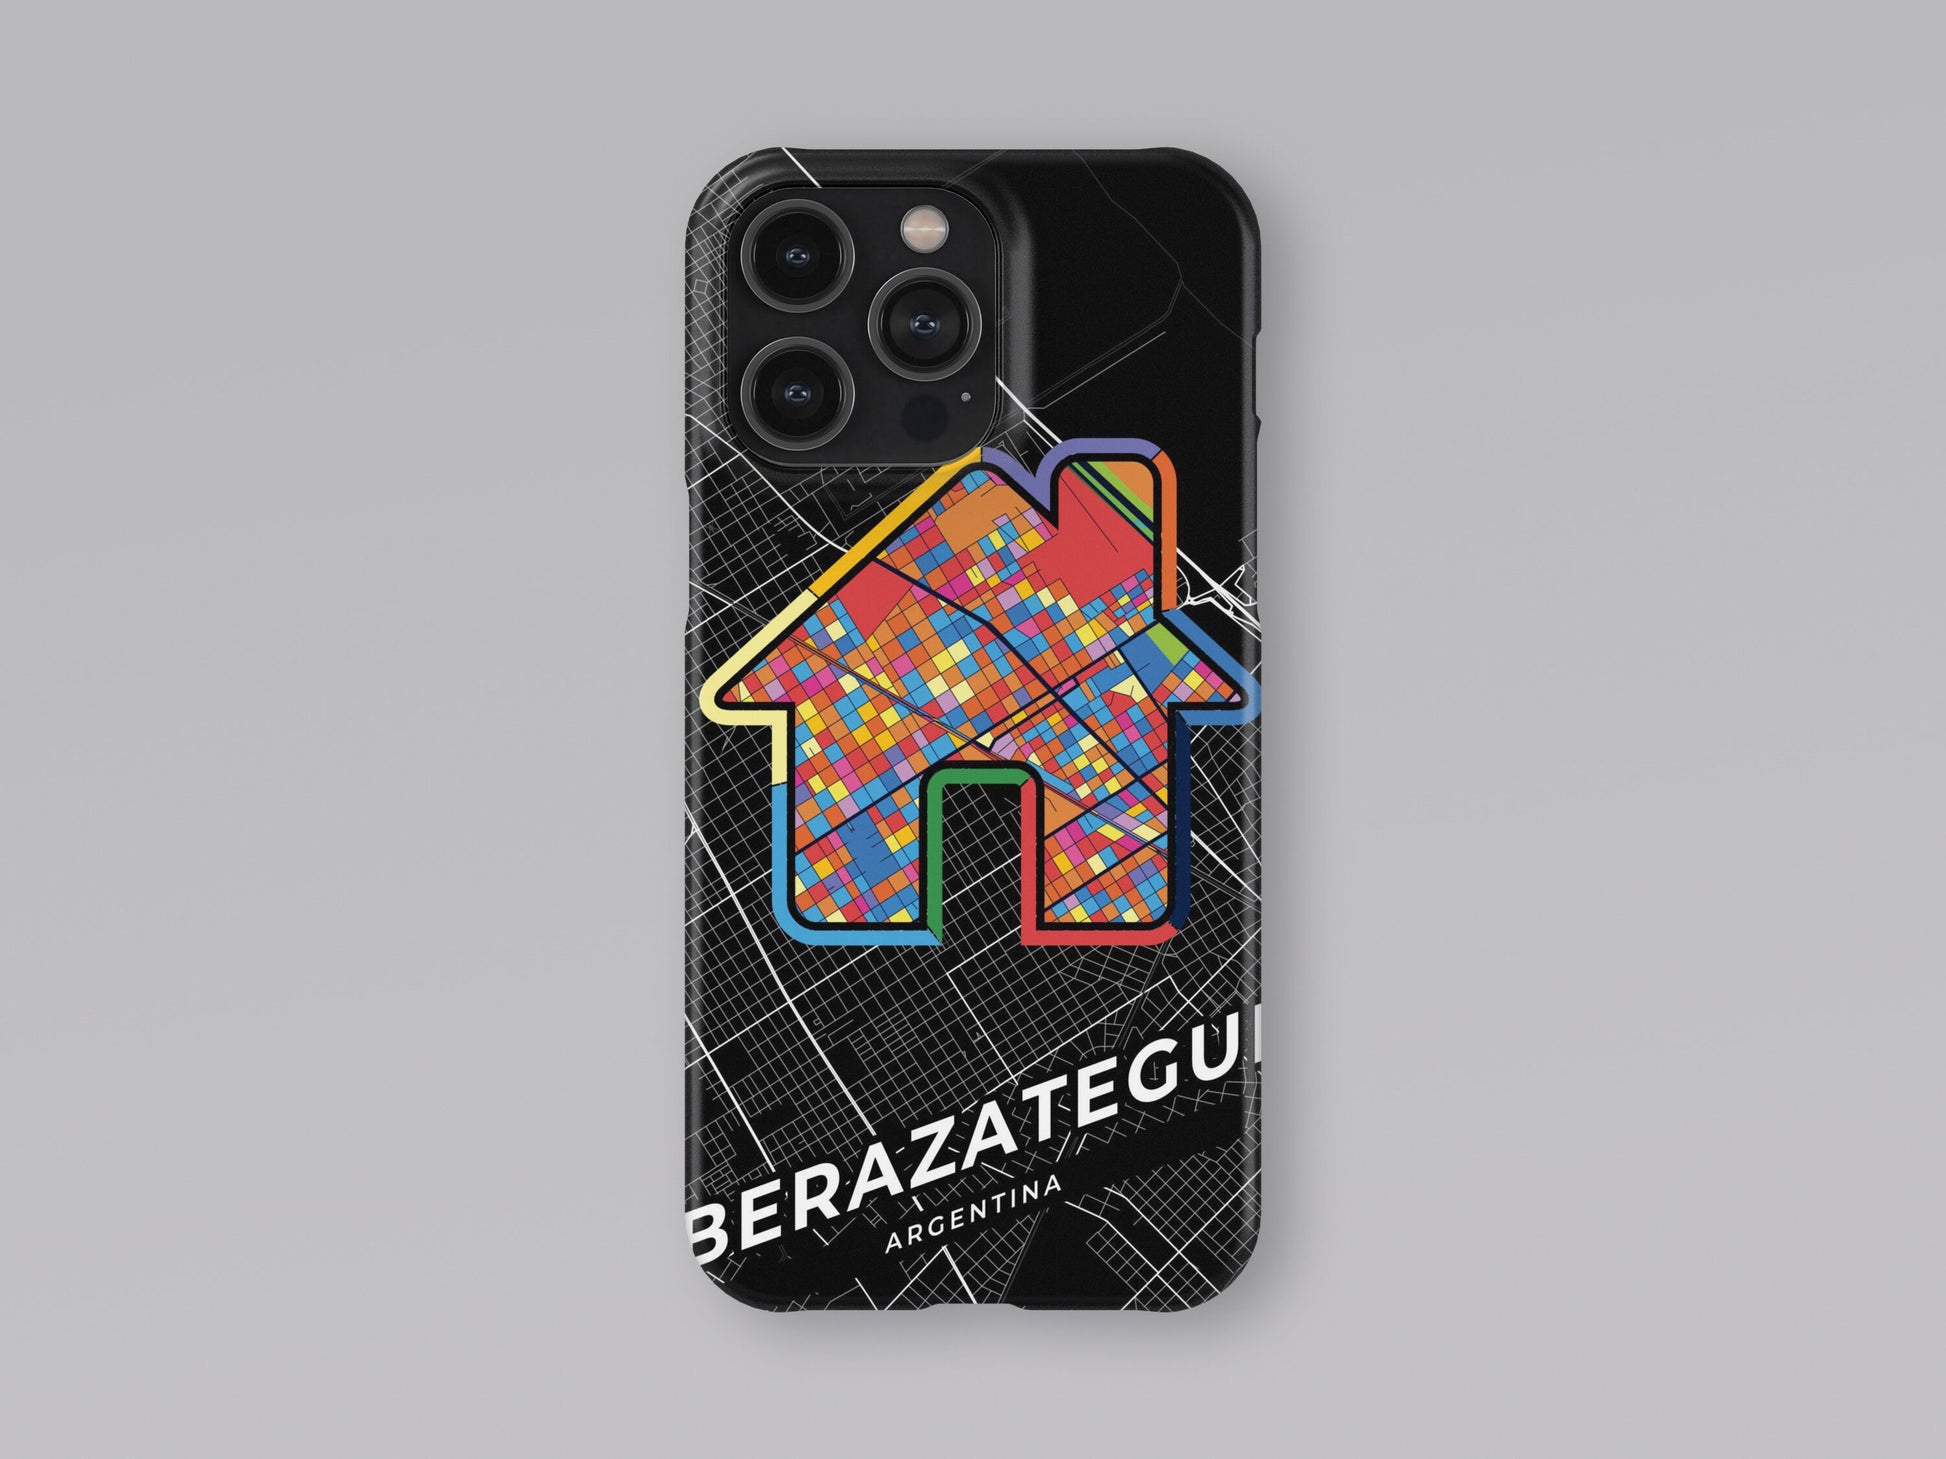 Berazategui Argentina slim phone case with colorful icon. Birthday, wedding or housewarming gift. Couple match cases. 3